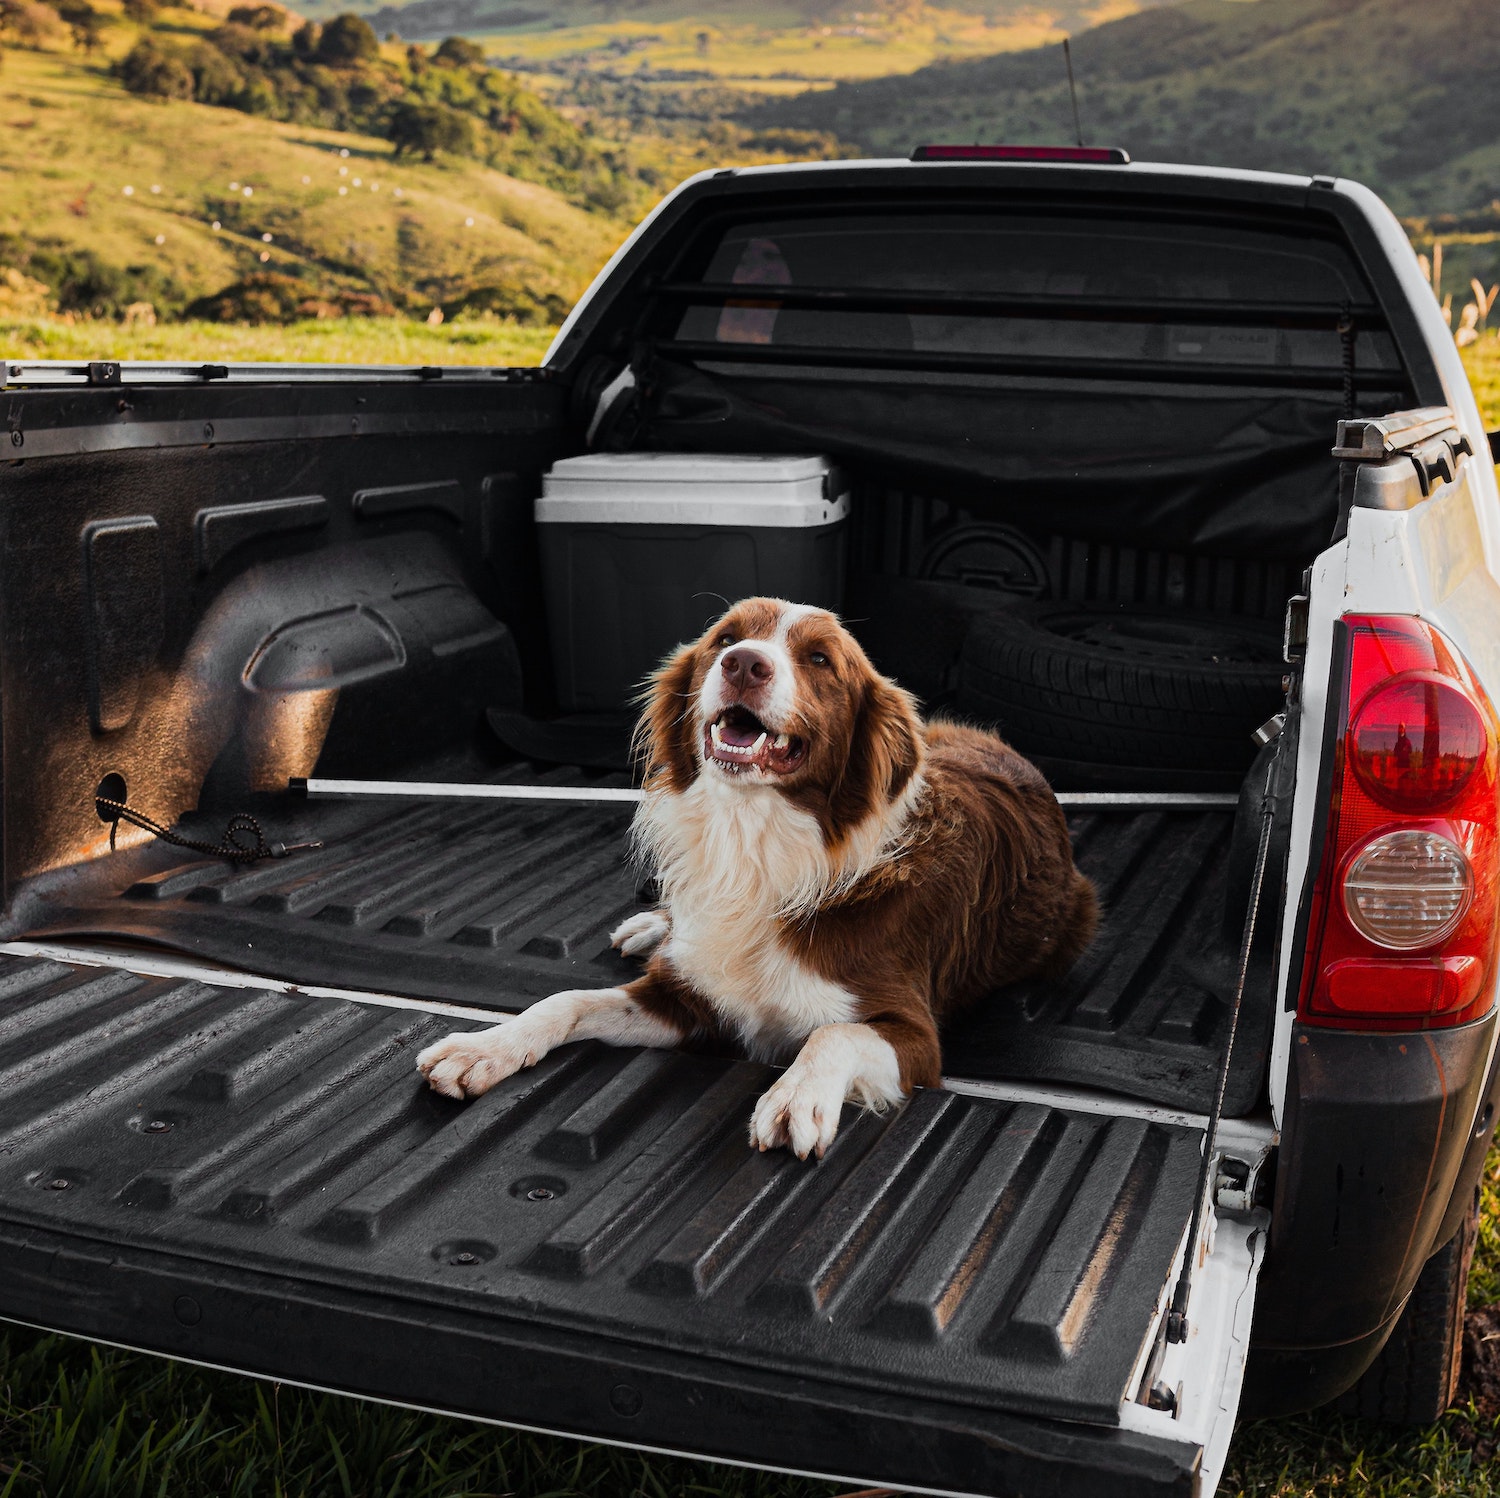 Dog sitting in the bed of a Honda Ridgeline pickup truck.